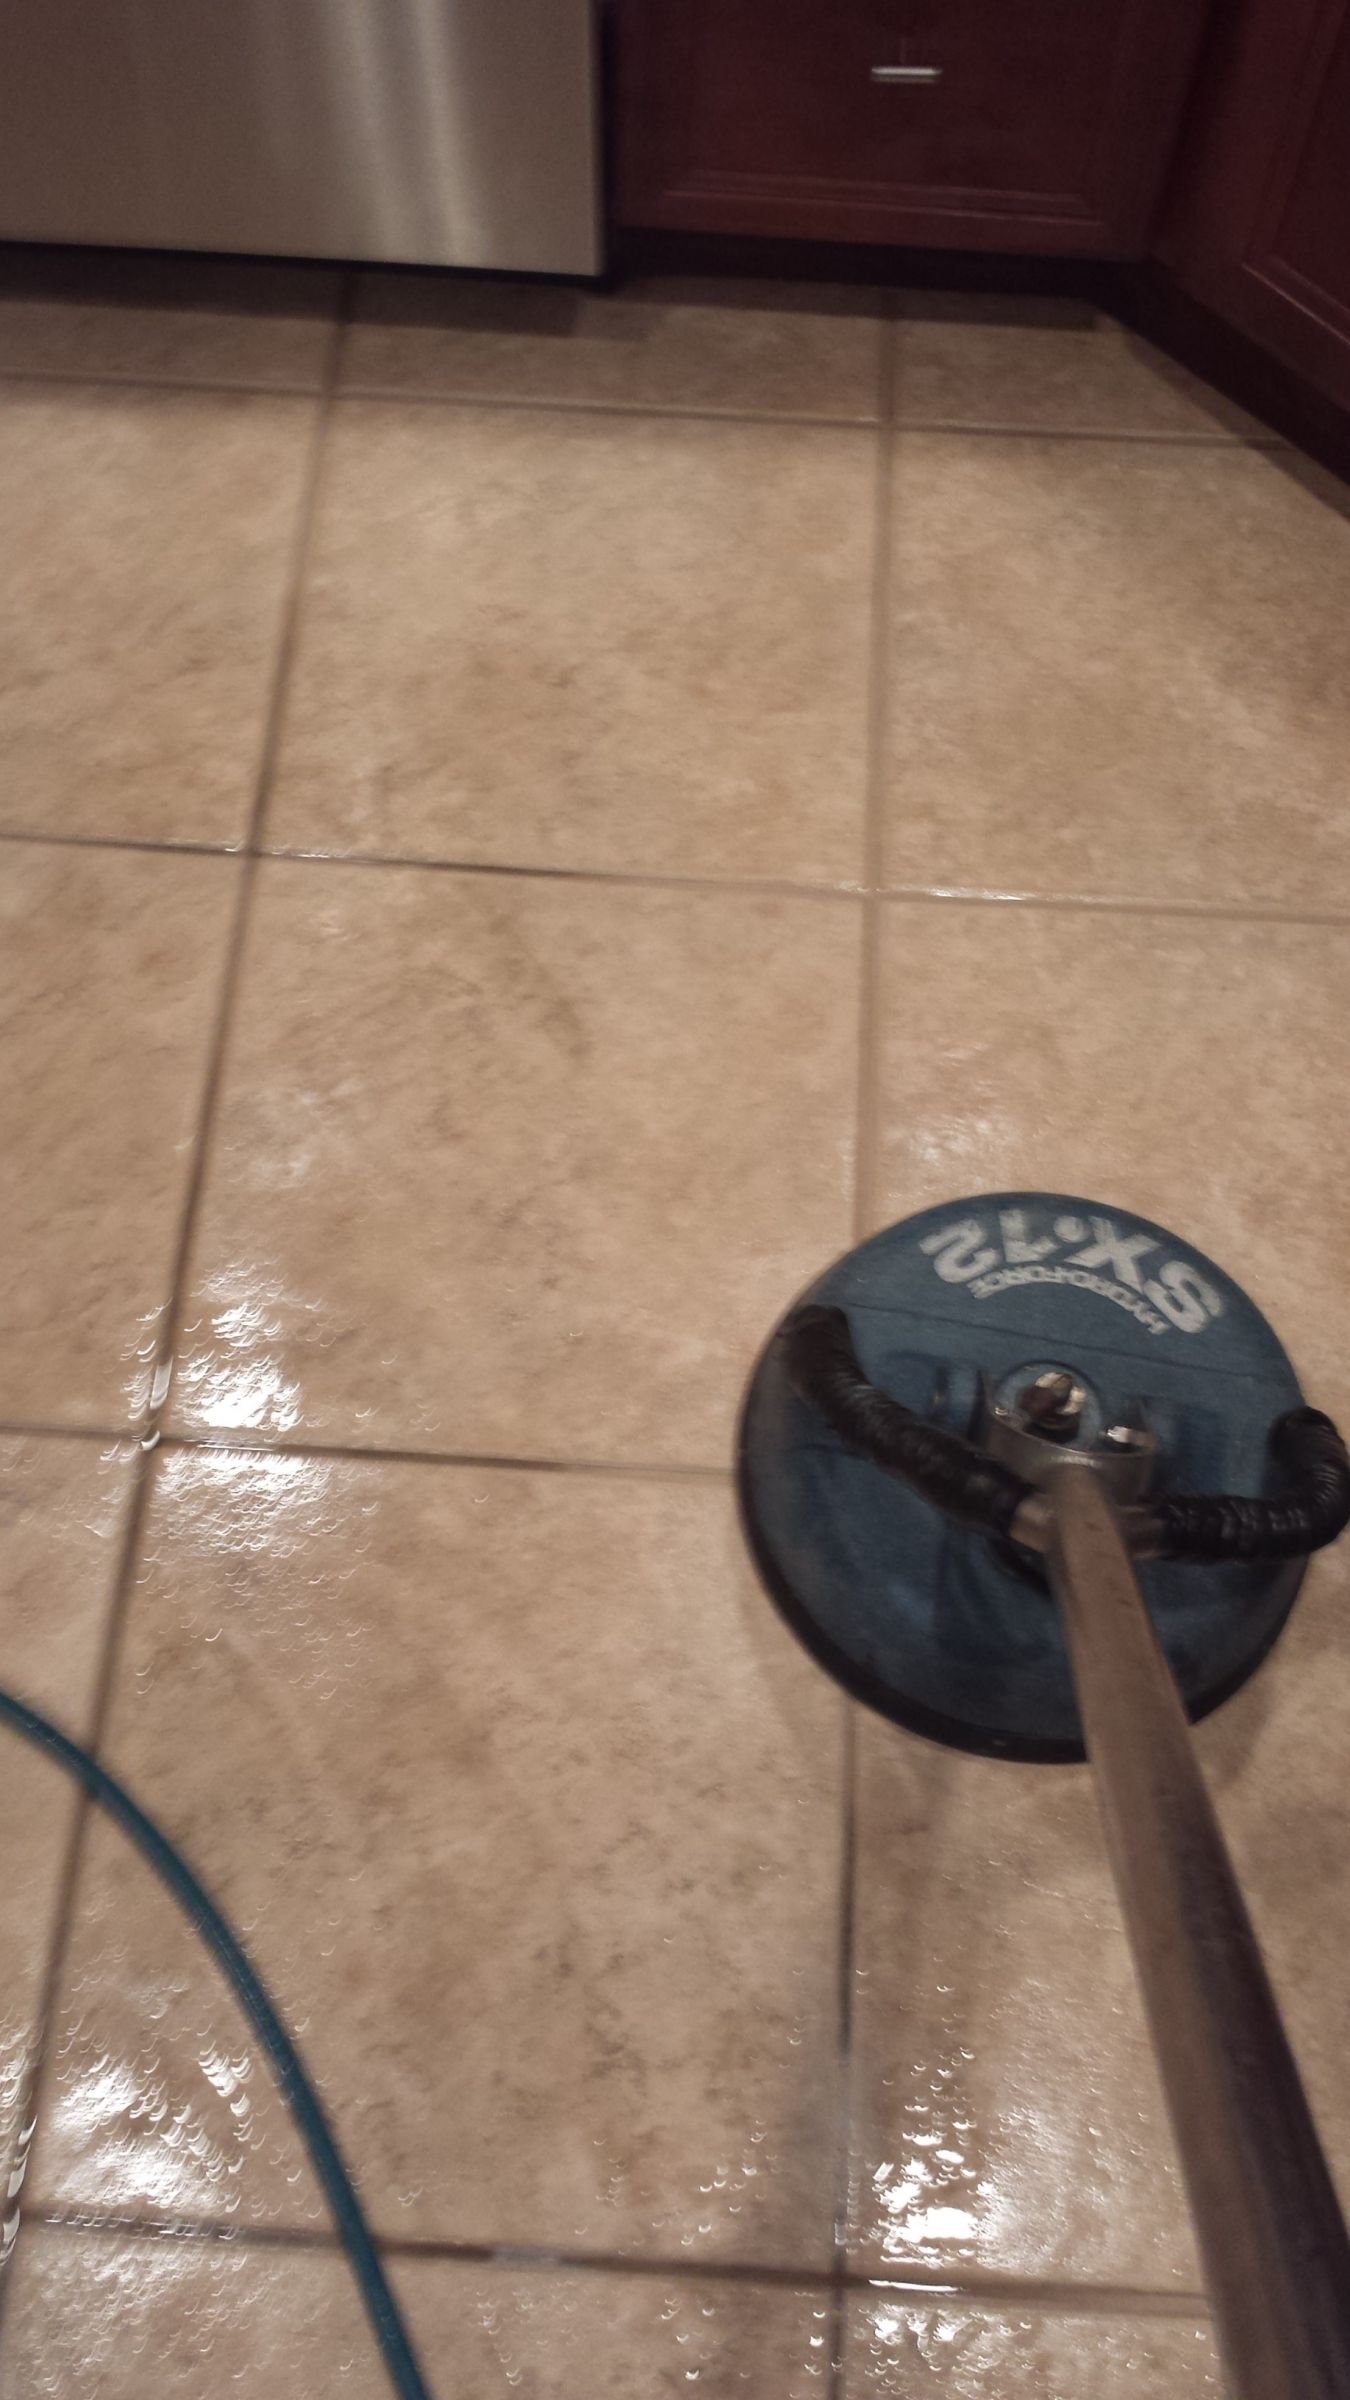 Discover the Expert Tile and Grout Cleaning Services by Majestic Carpet Cleaning Services in Blackwood, NJ